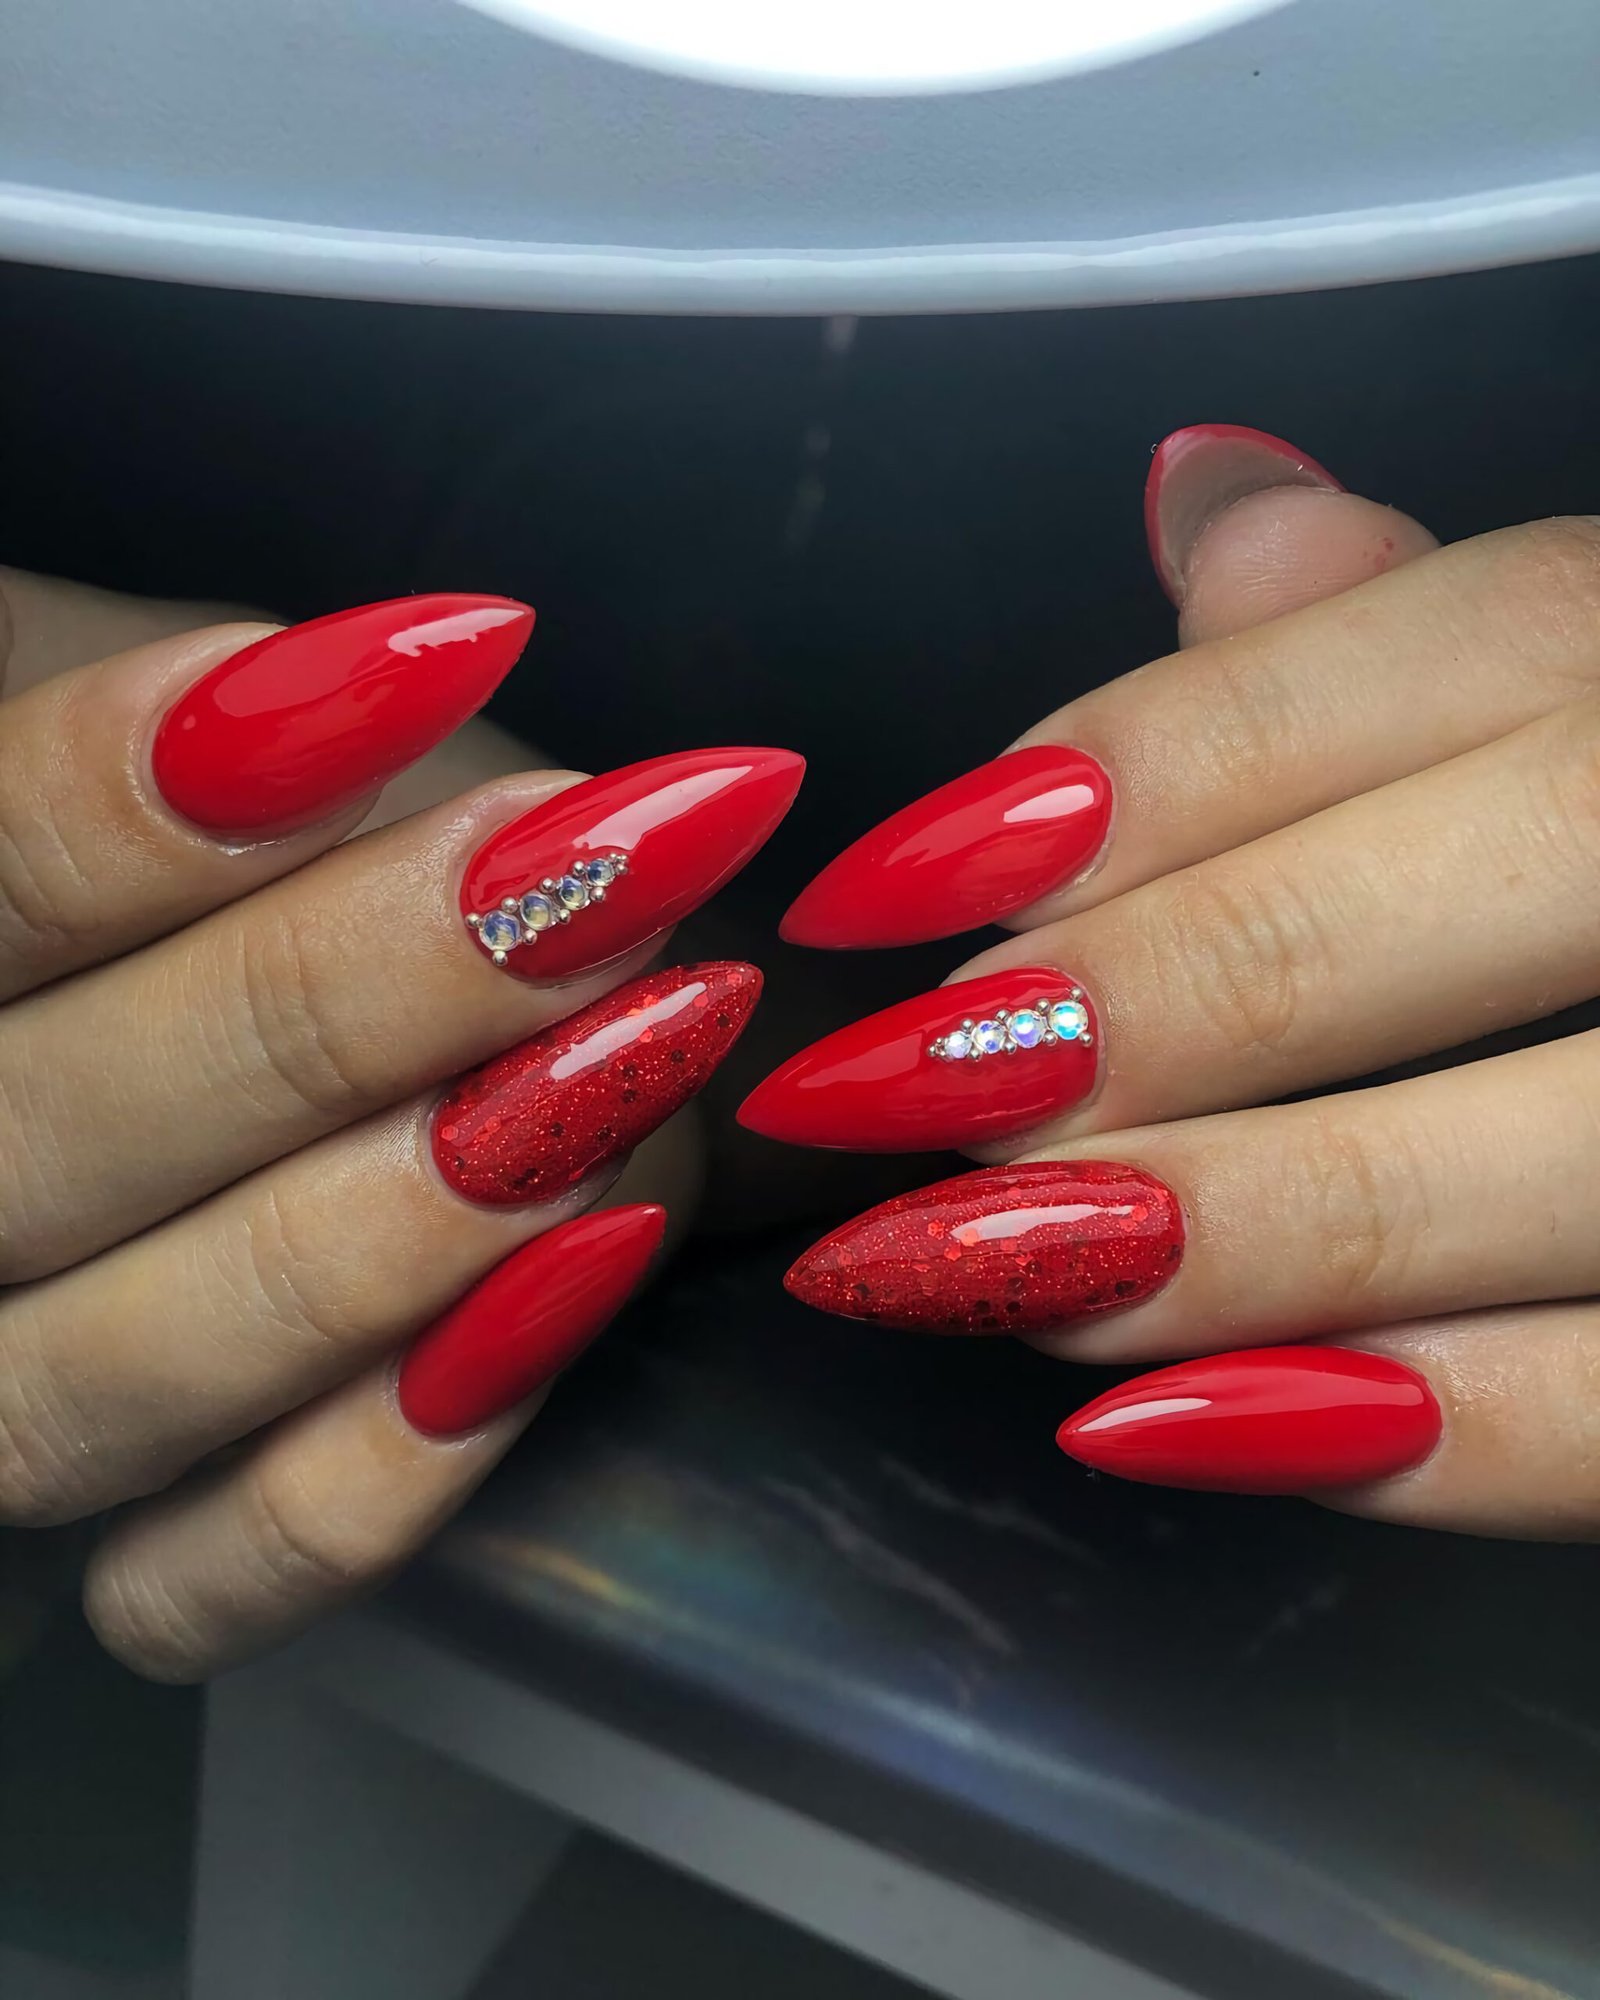 Stylish red nails with precious stones